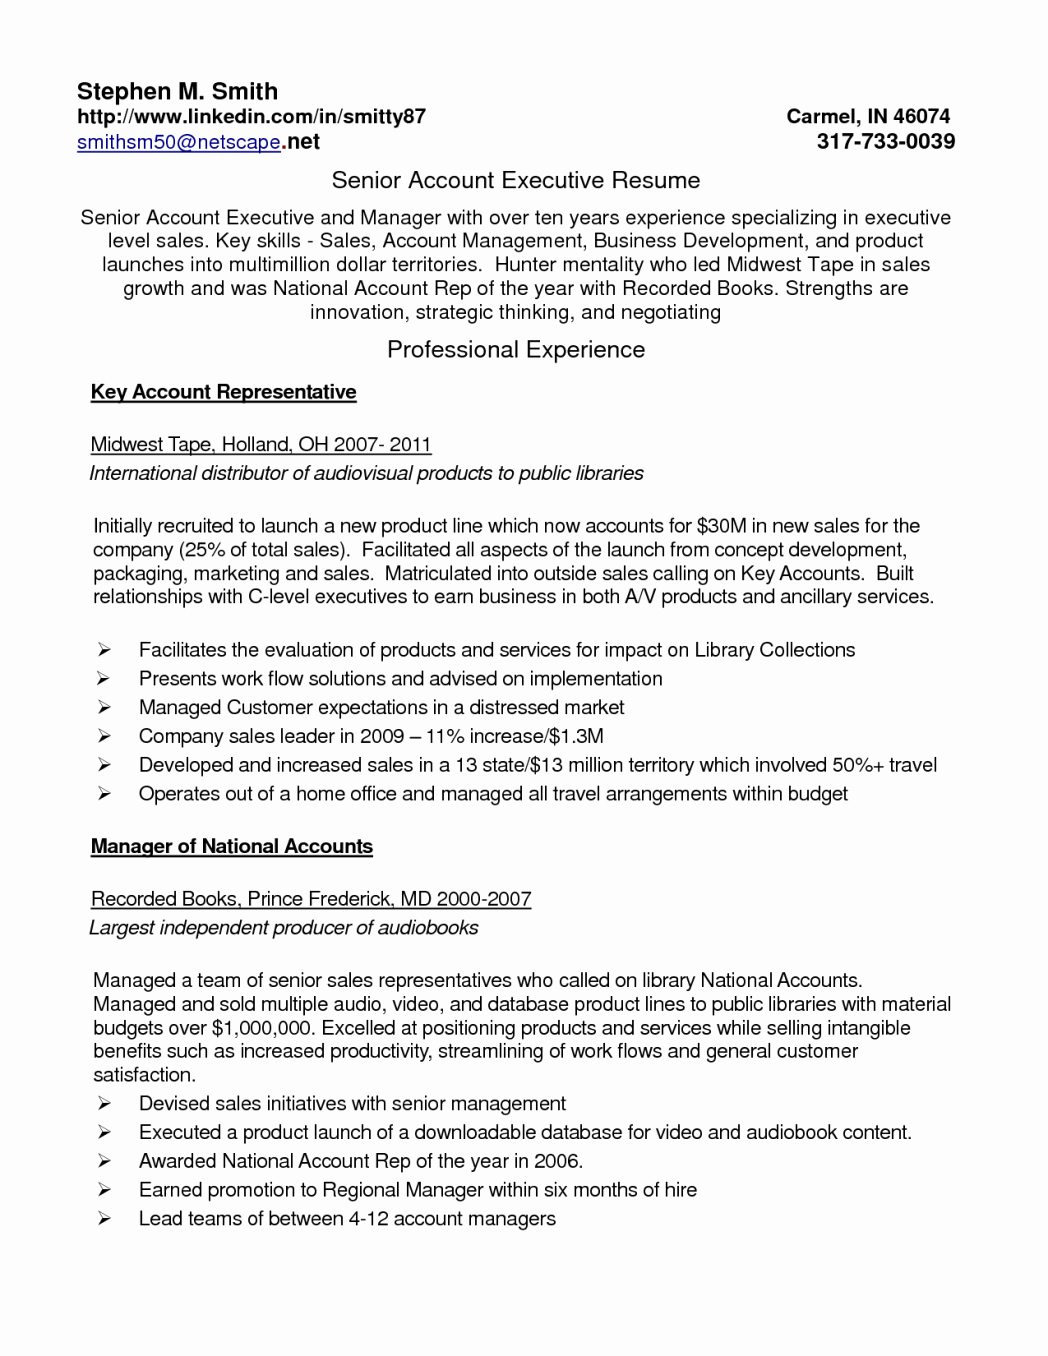 Personal Skills Resume Manager